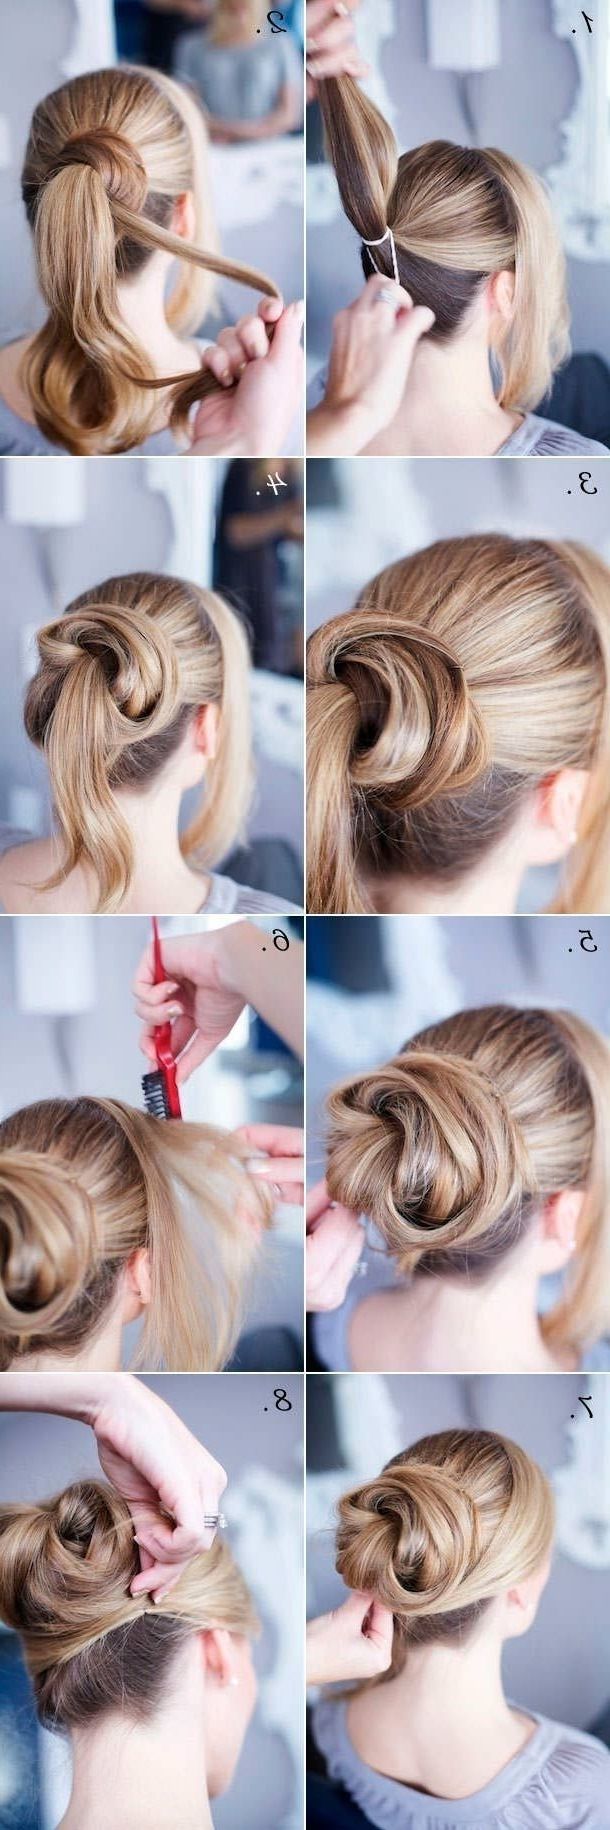 14 Easy Stepstep Updo Hairstyles Tutorials – Pretty Designs In Diy Updo Hairstyles For Long Hair (View 1 of 15)